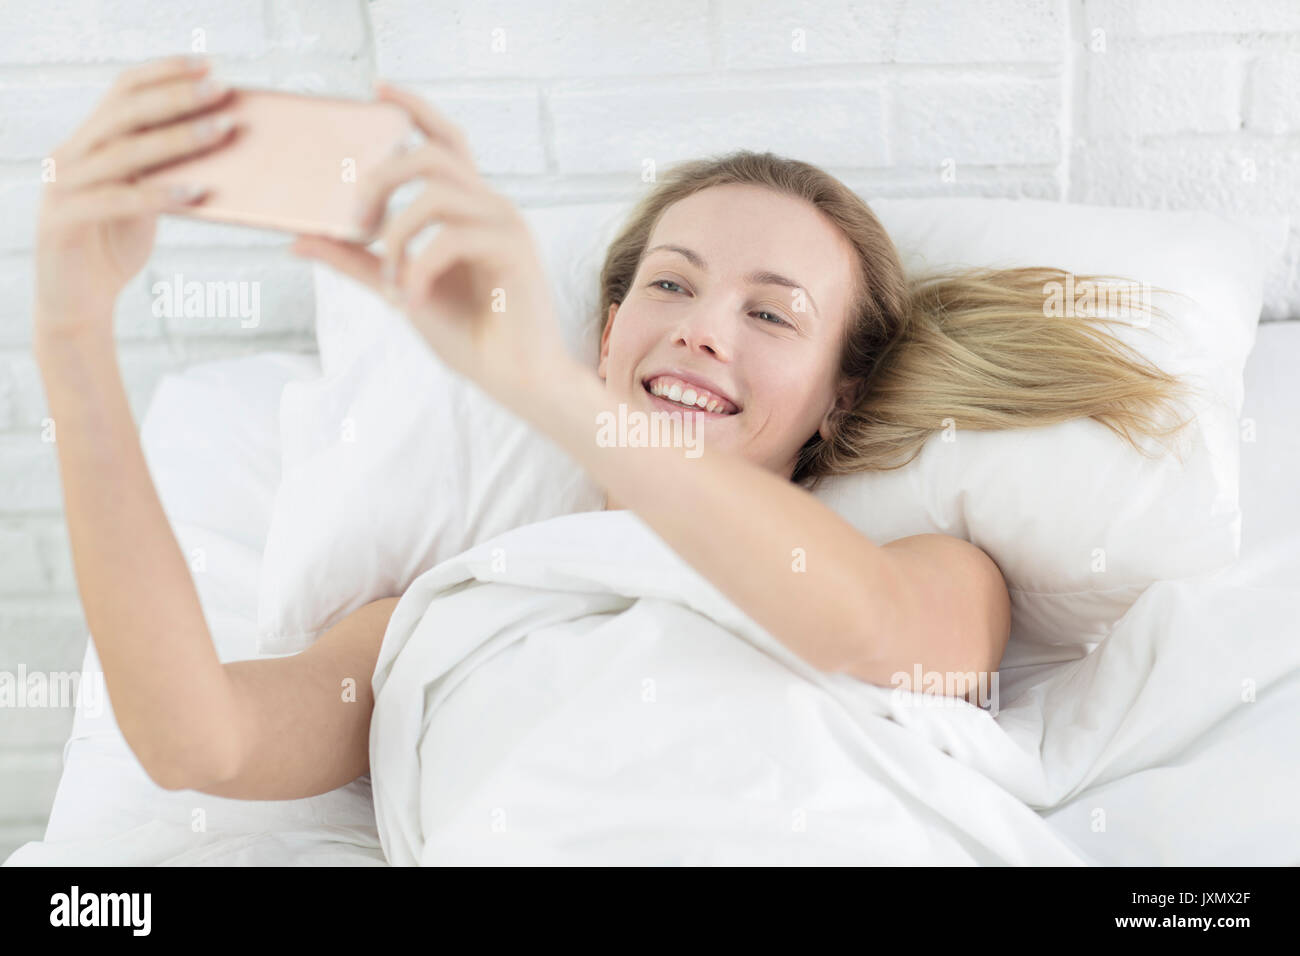 Young woman lying in bed, taking selfie, using smartphone Stock Photo